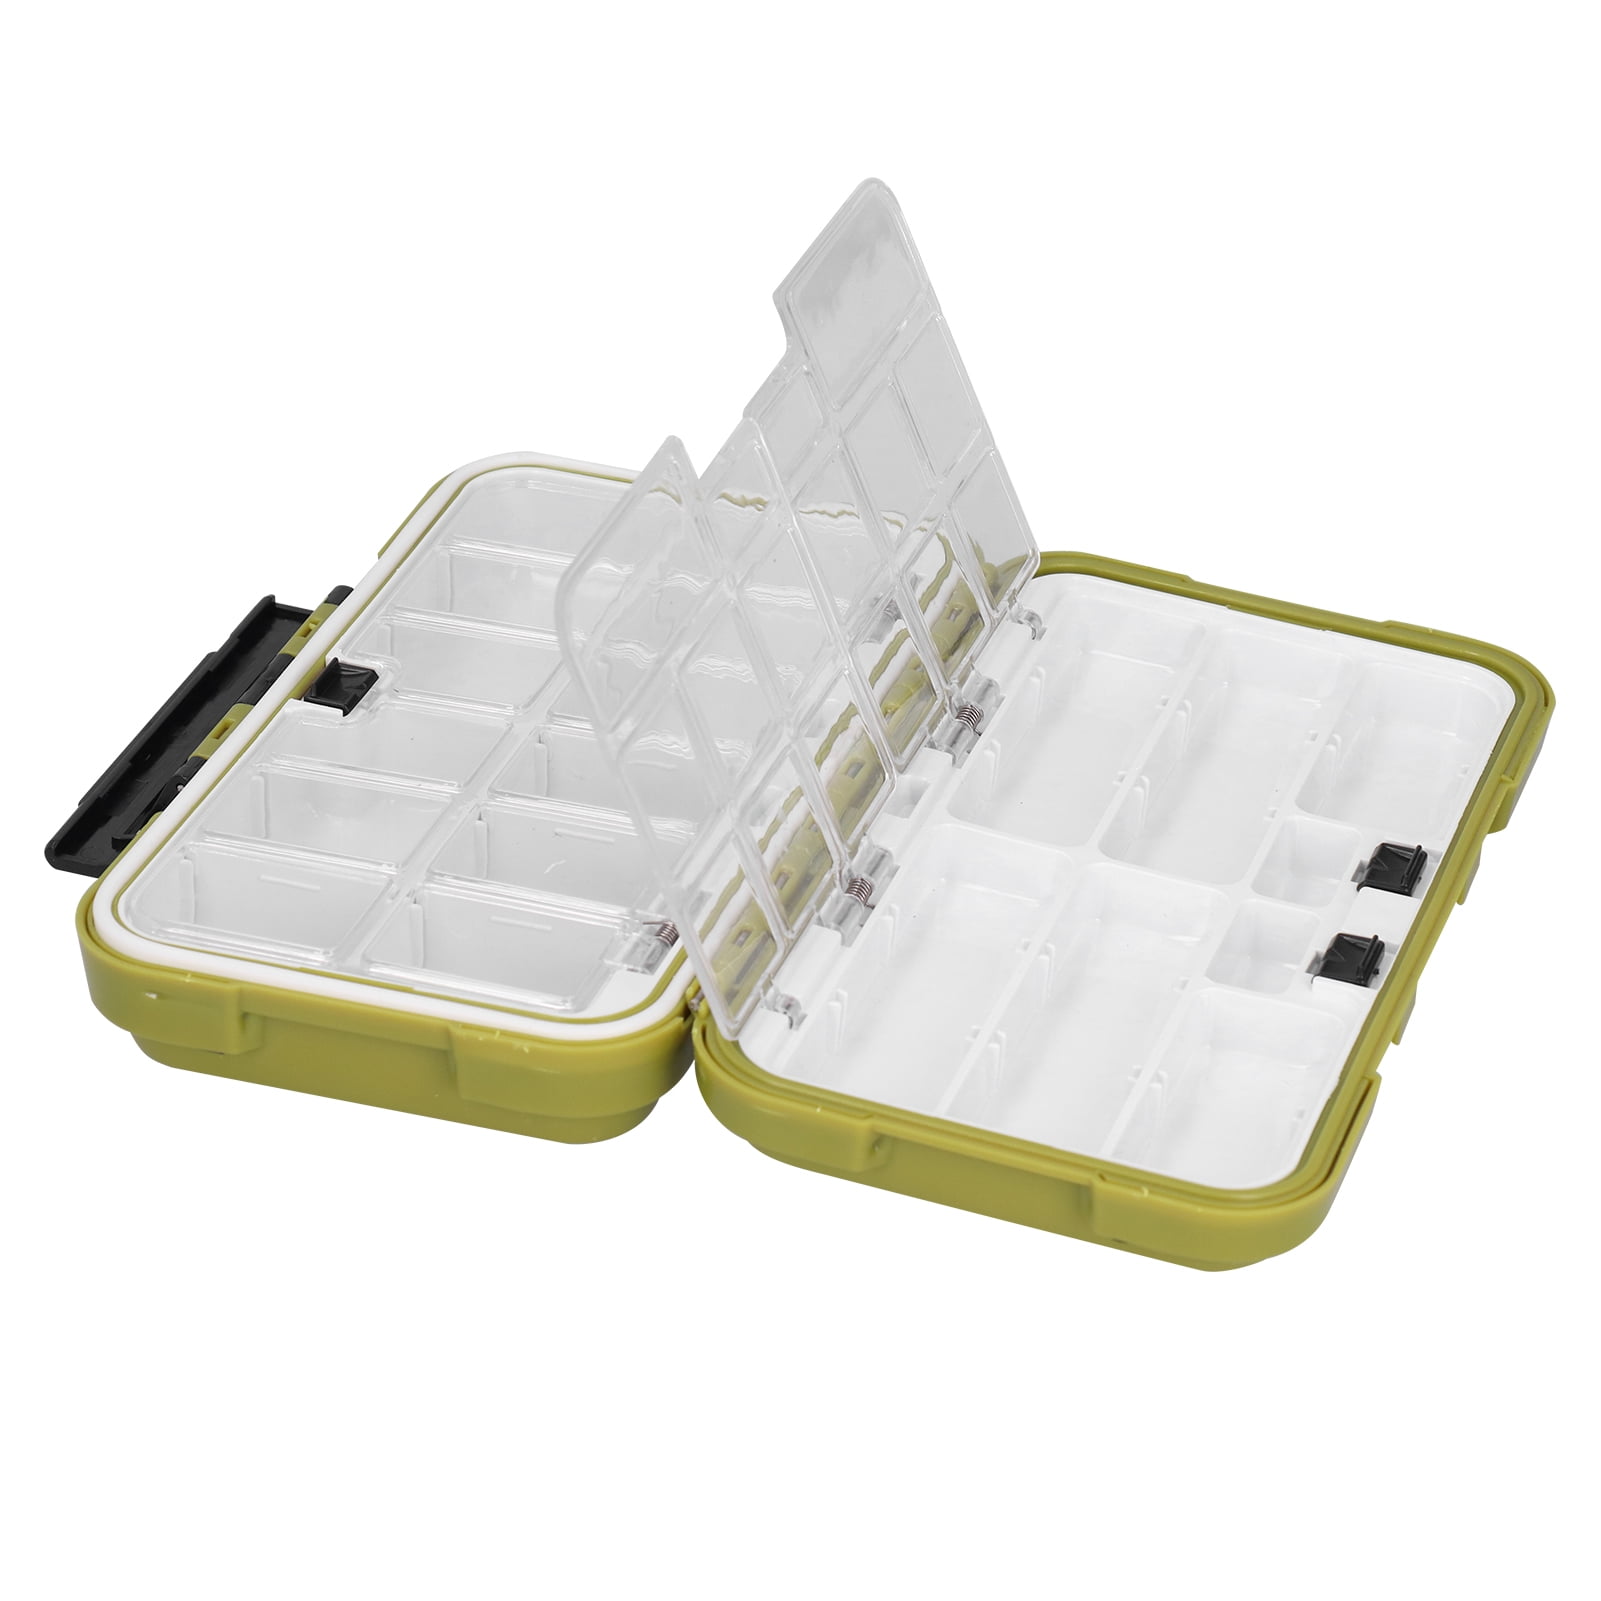 9 Compartments Fishing Tackle Box 2 Layer Fishing Lure Bait Hooks Storage 